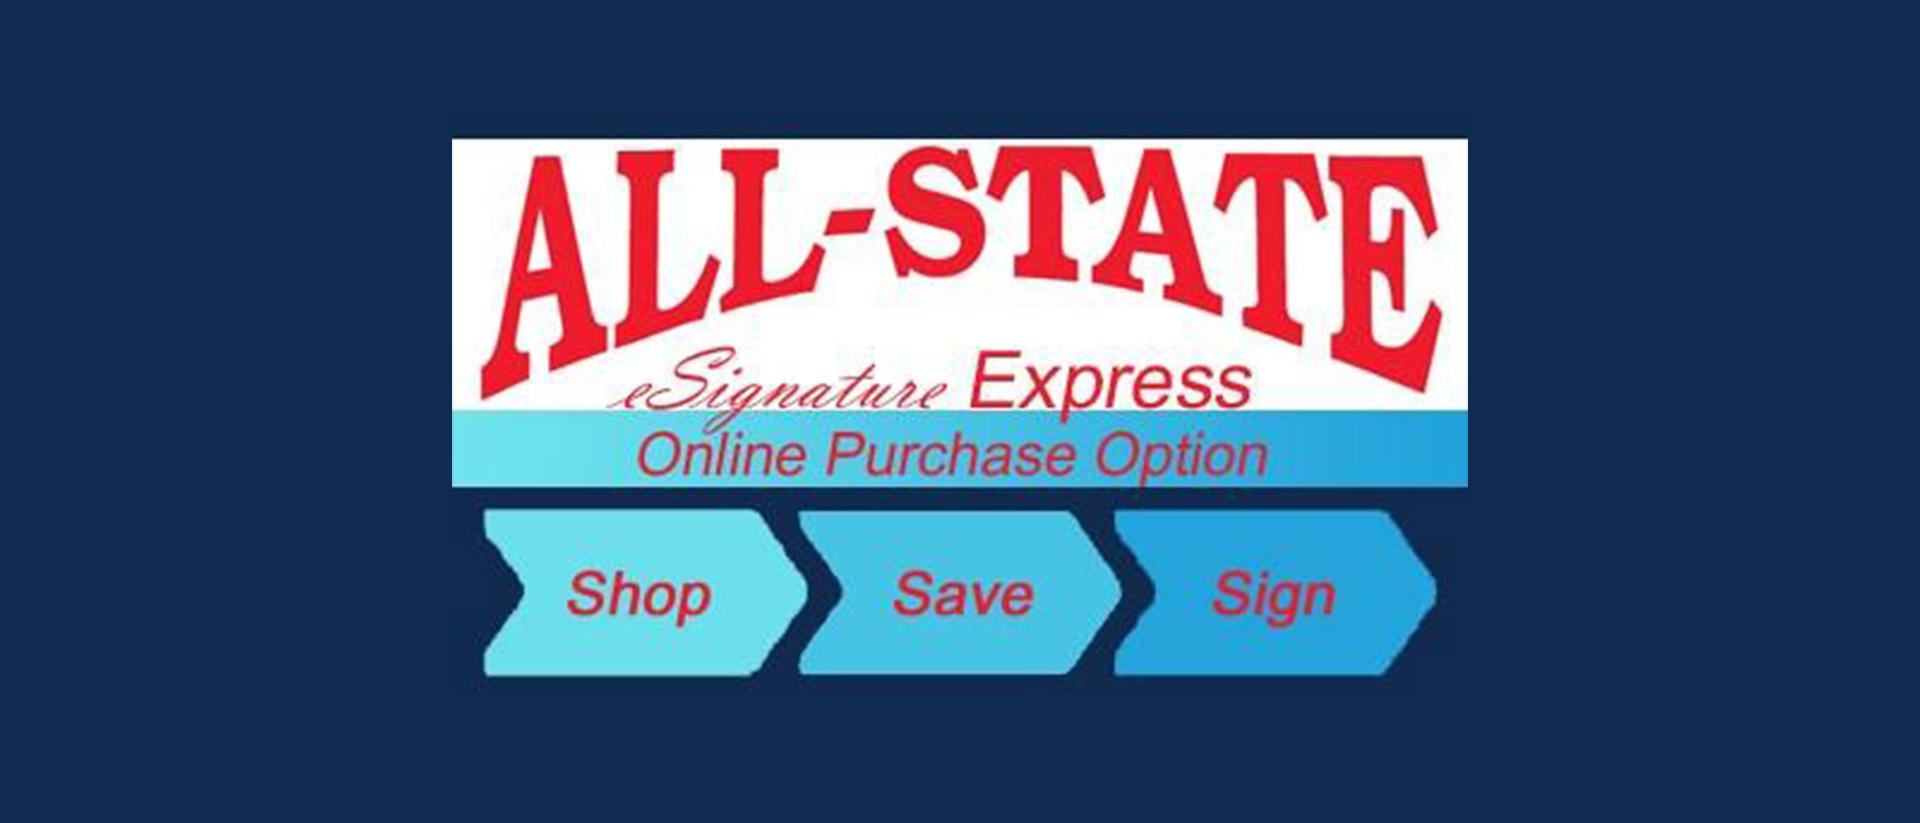 All-State Signature Express Online Purchase Option